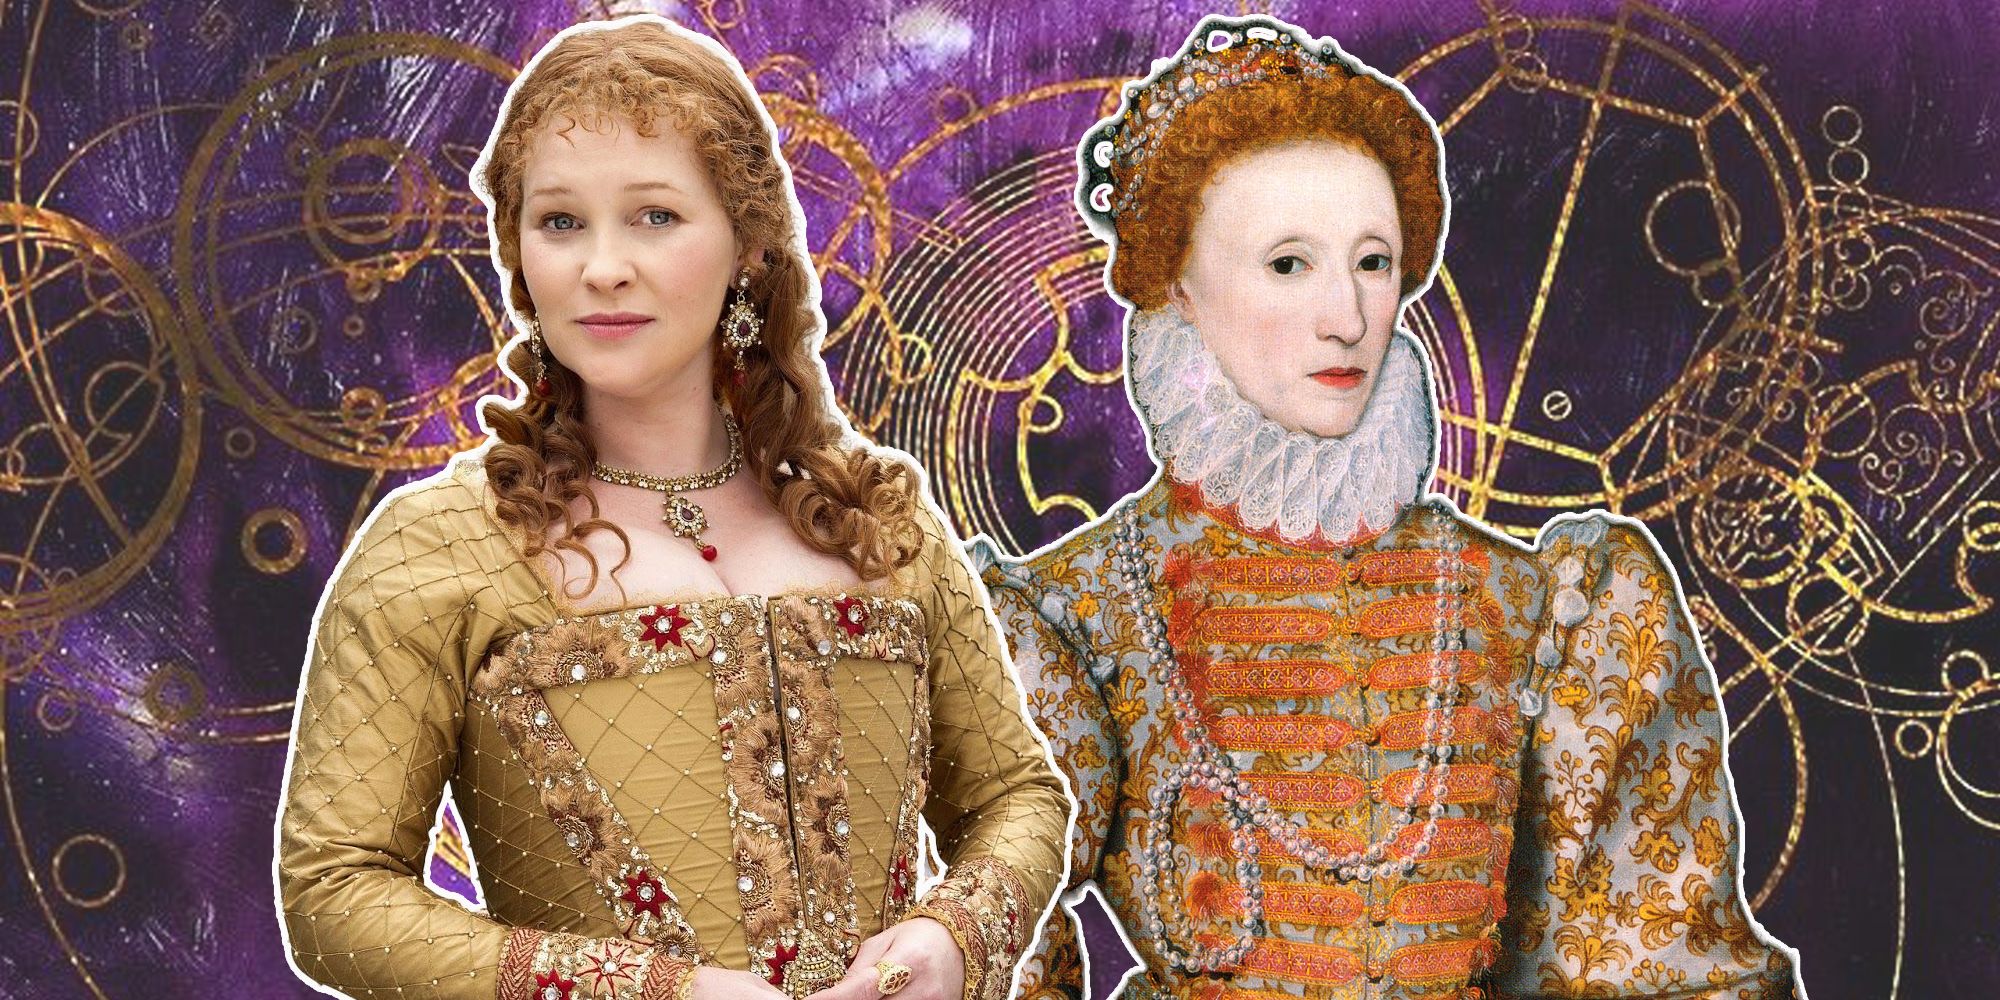 Queen Elizabeth I made two appearances in 'Doctor Who,' one elder (Angela Pleasance) and one younger (Joanna Page)